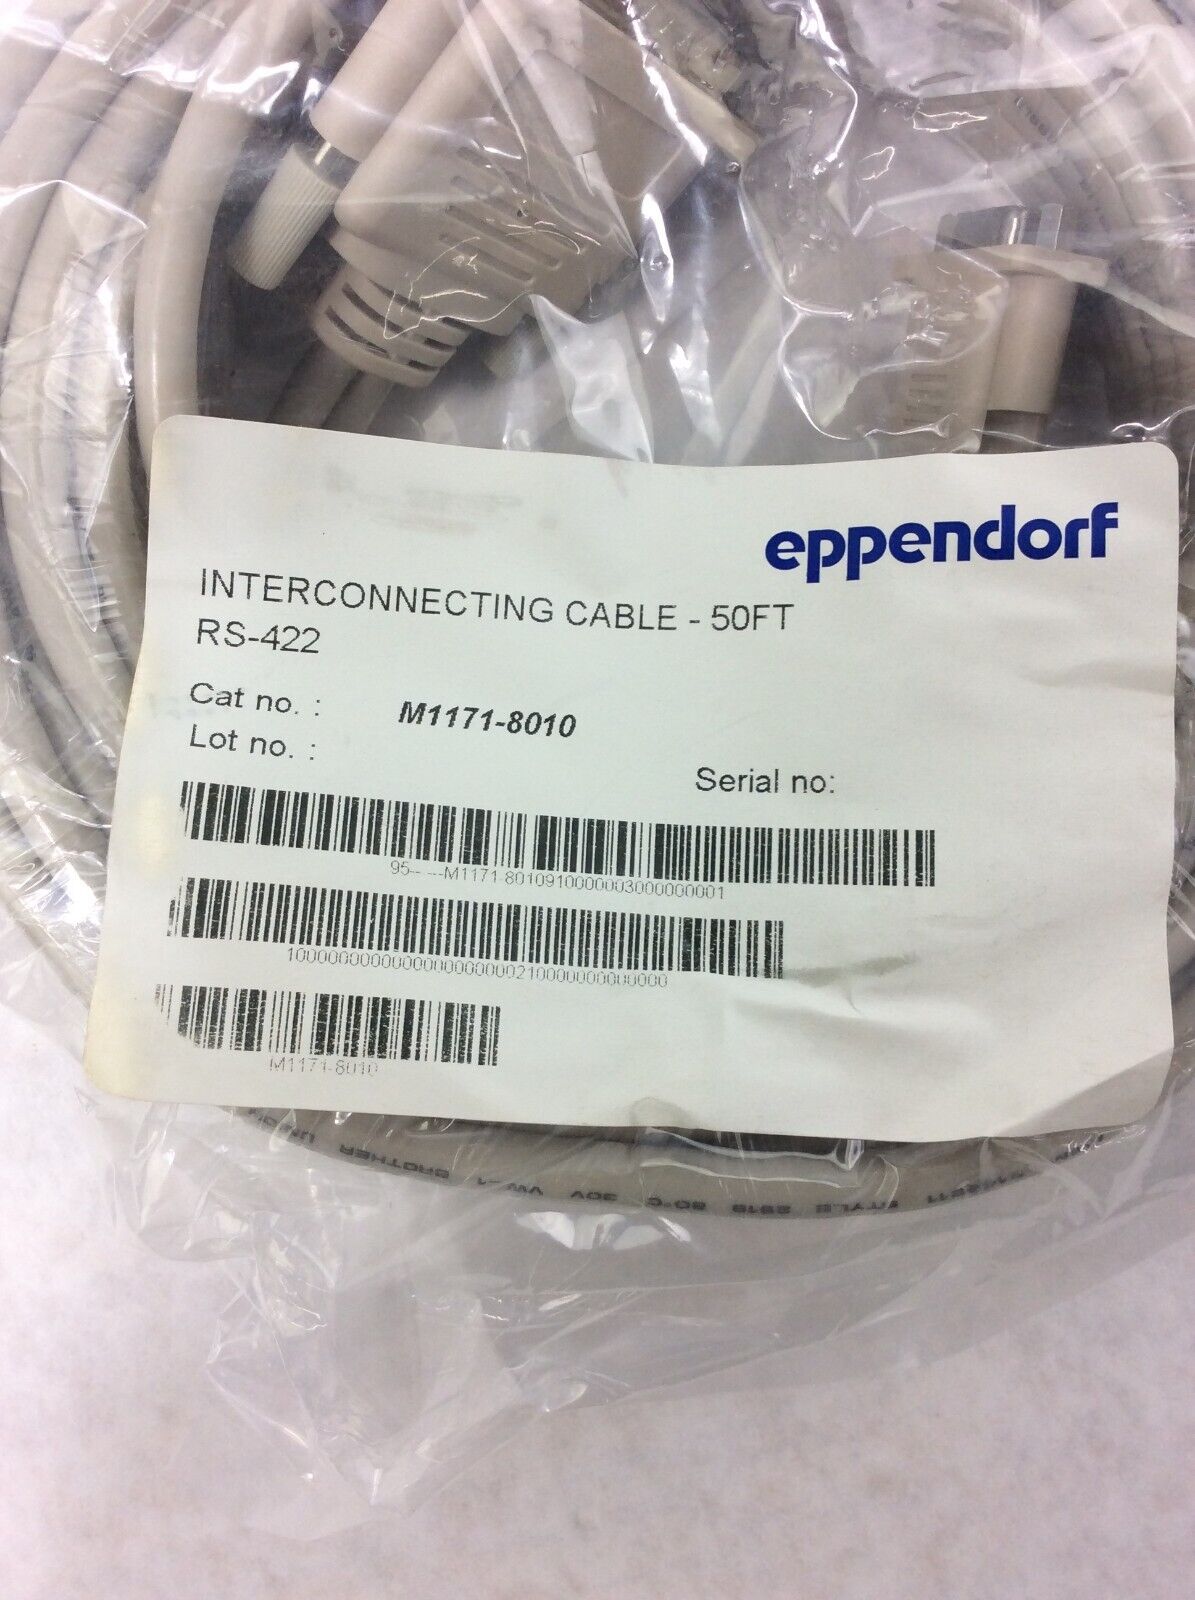 Eppendorf M1171-8010 RS-422 Interconnecting Cable 50 Ft.